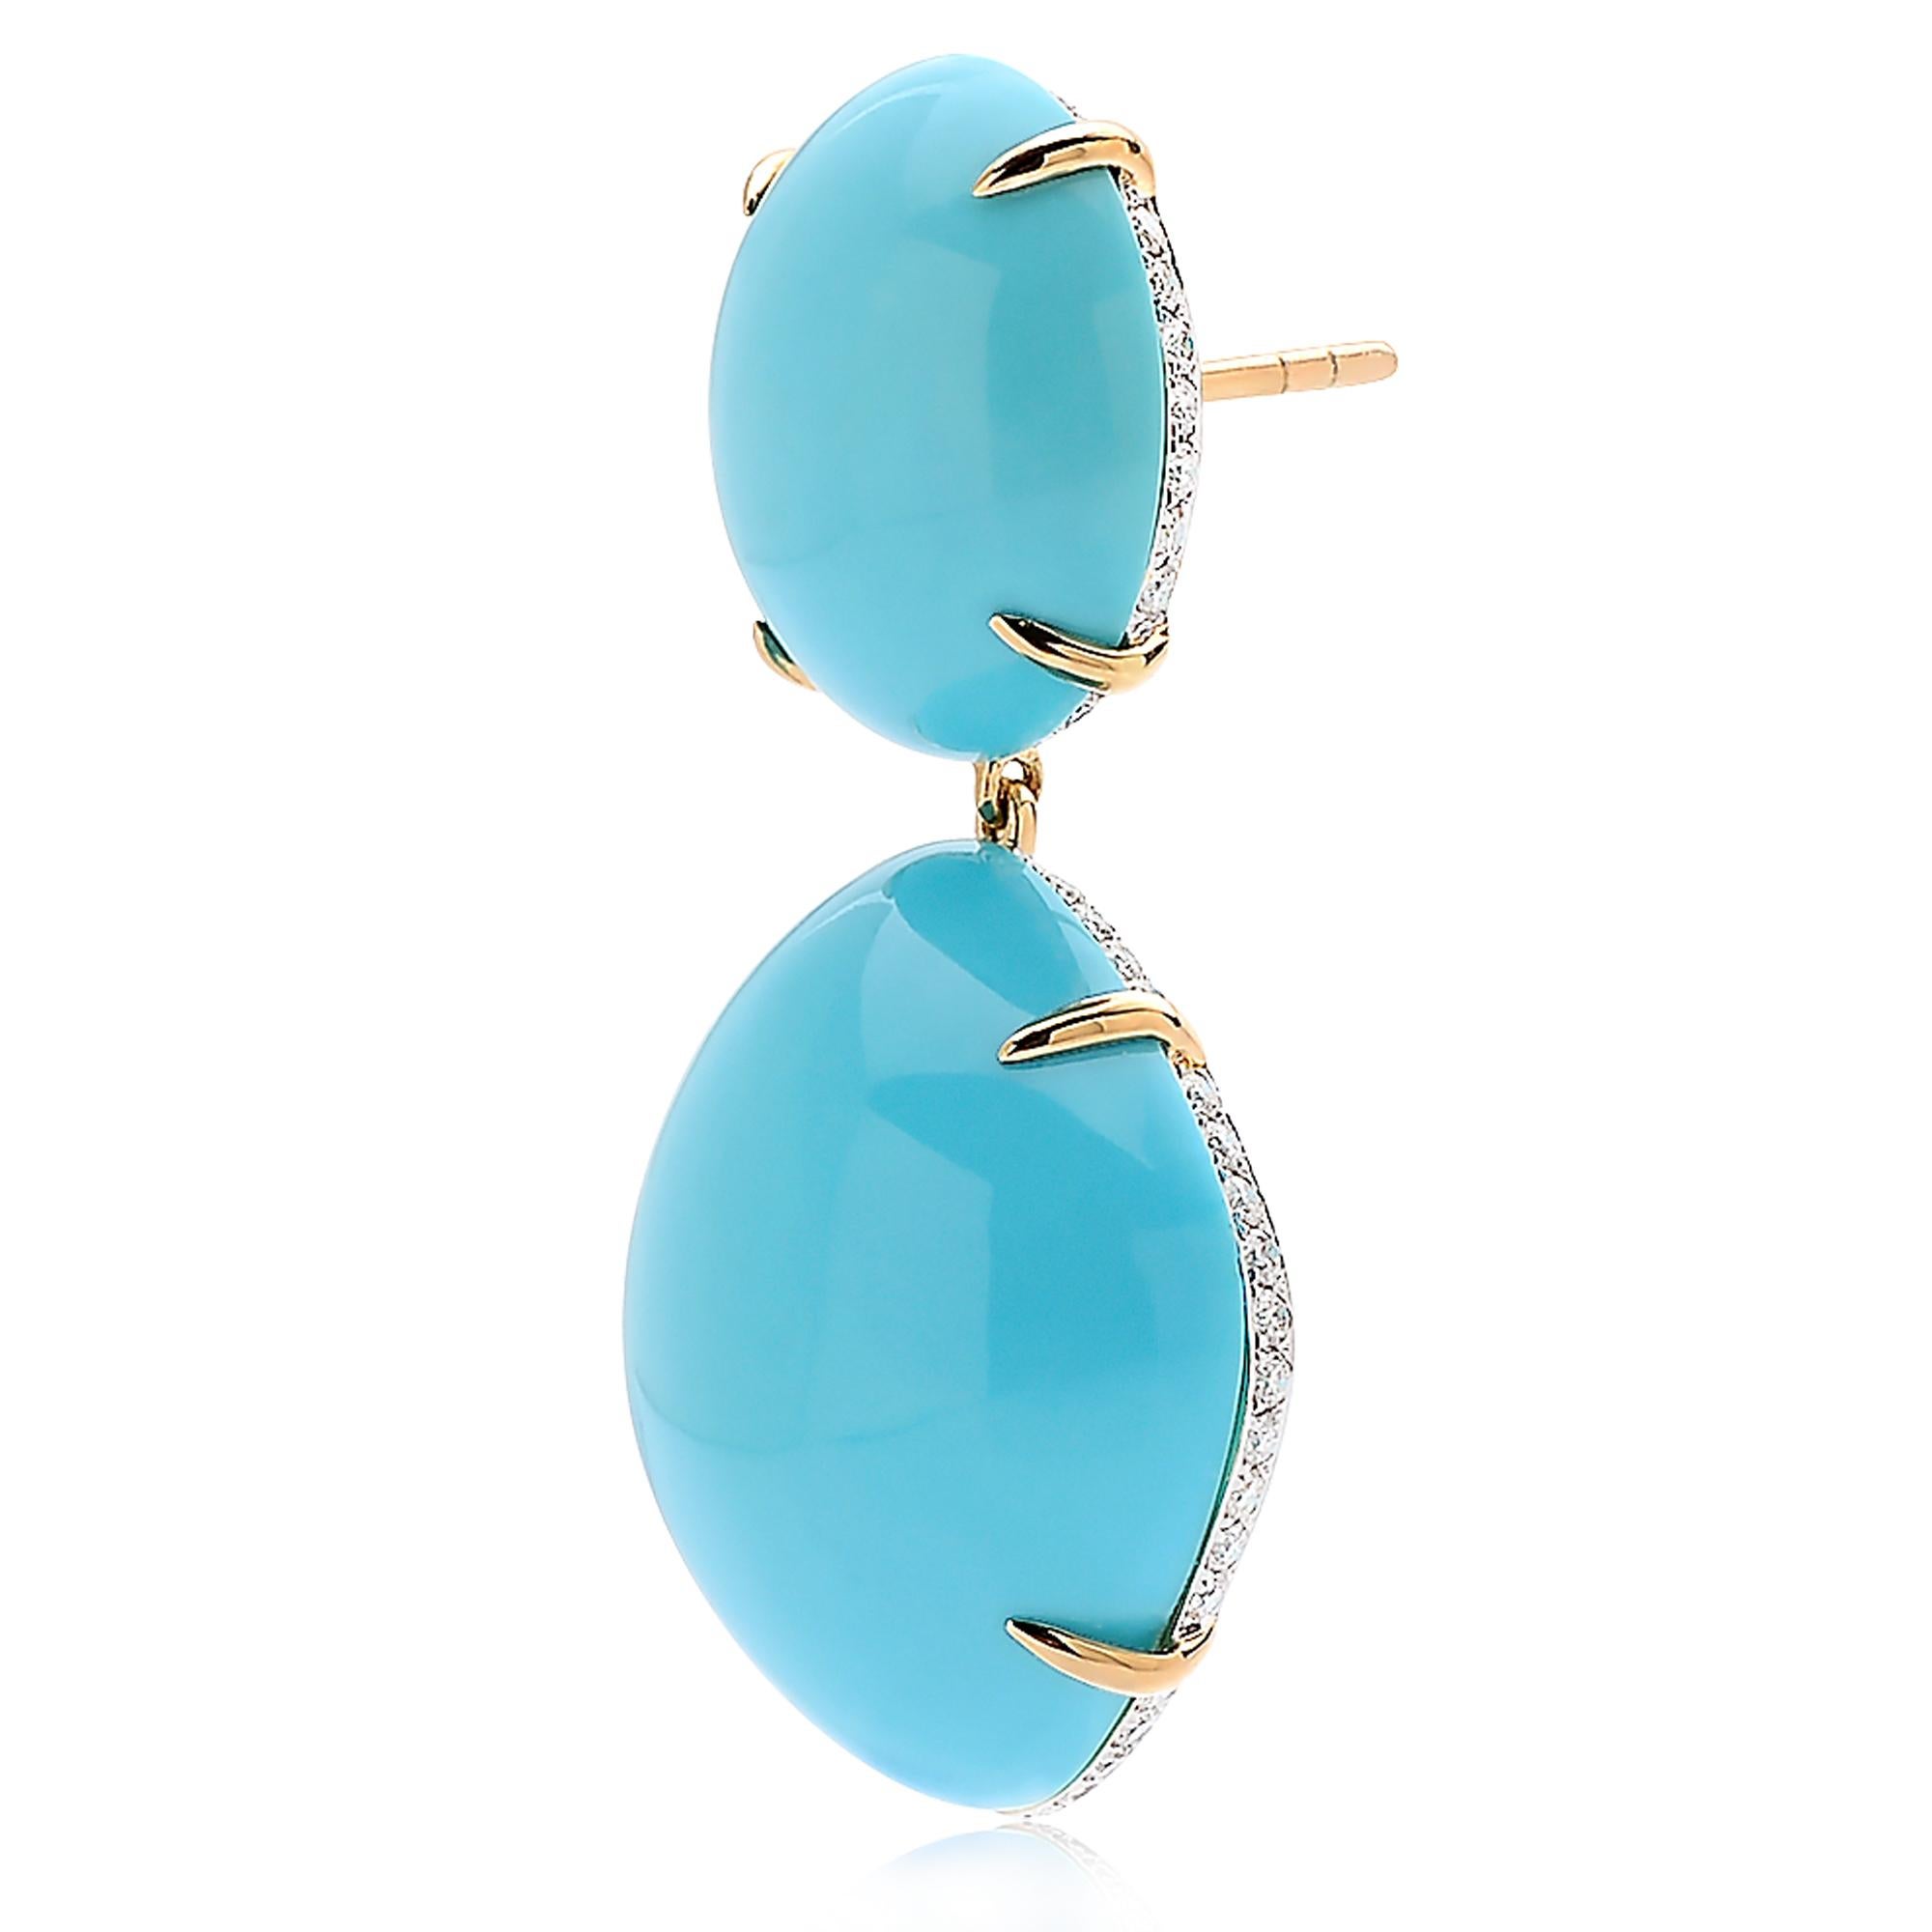 One of a kind Stabilized Sleeping Beauty Turquoise earrings set in 18kt yellow gold with pave-set round, brilliant diamond detail (D-G color, VS clarity) 

The weight of each earring is light and will not pull down the ear and it is designed